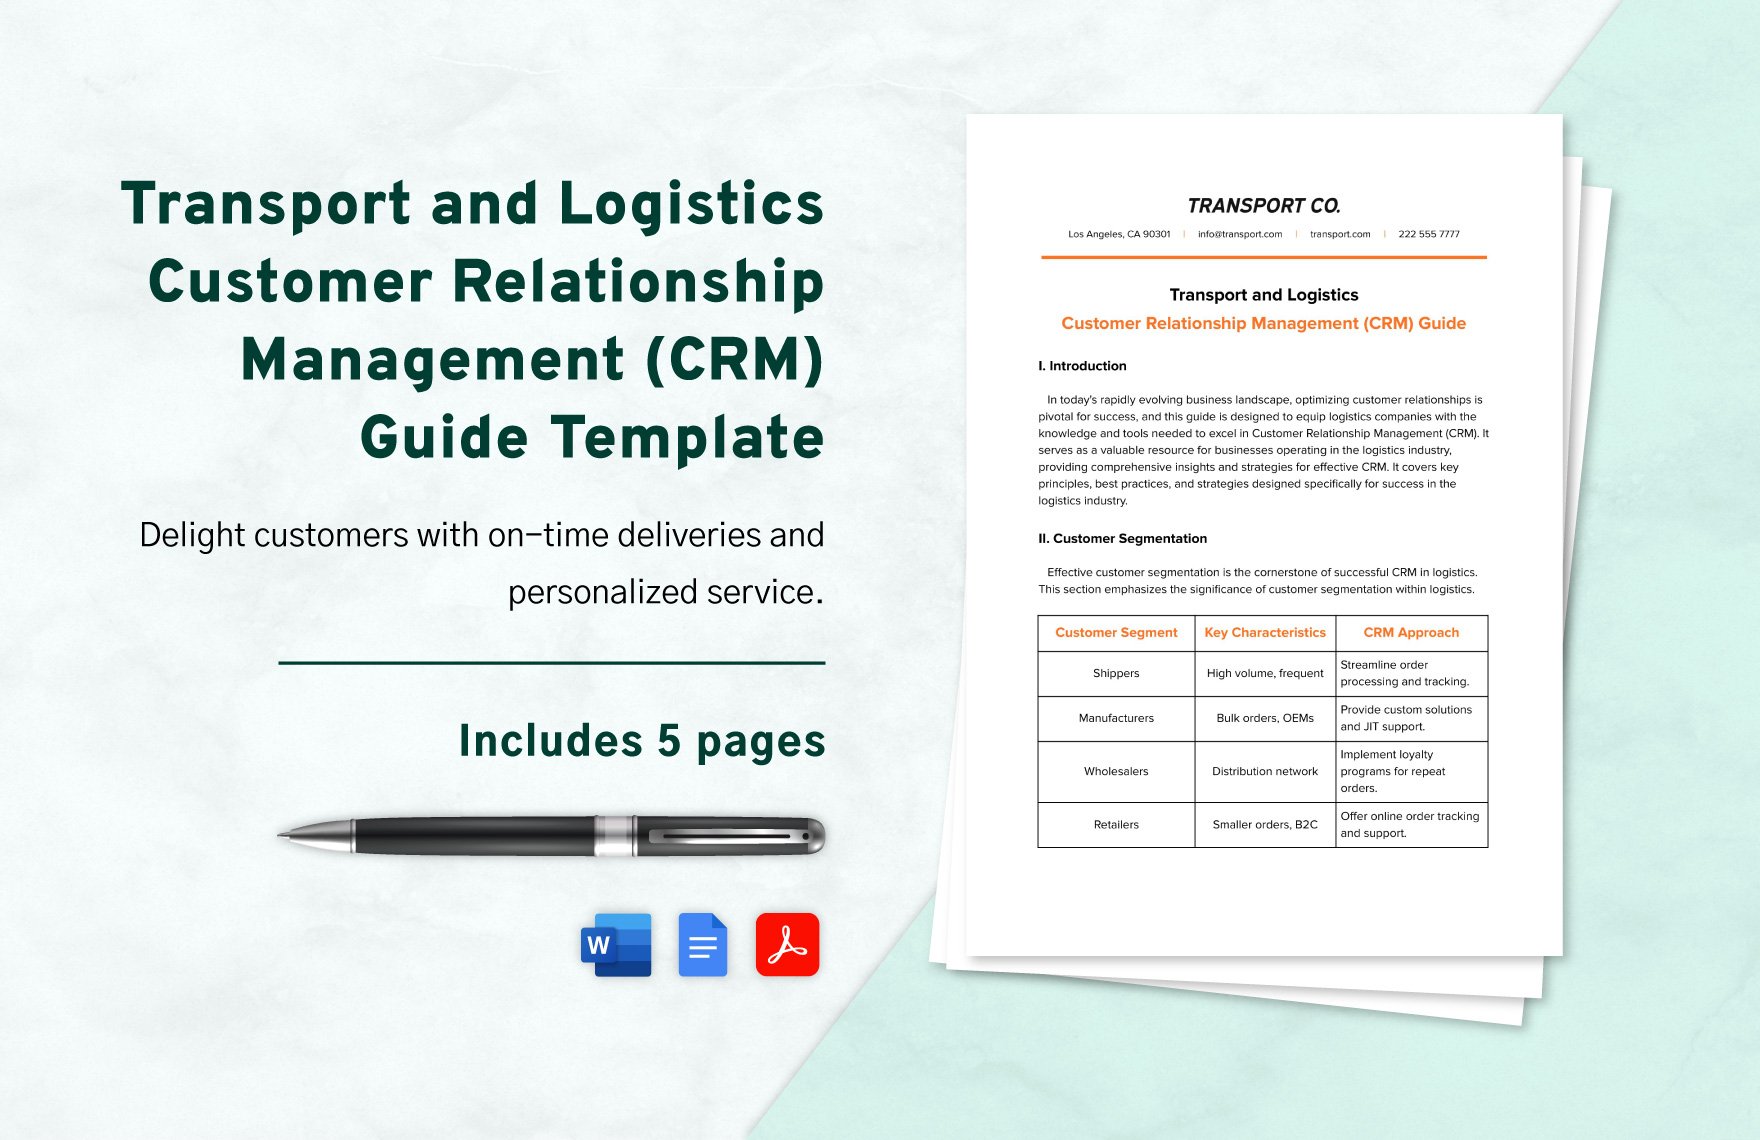 Transport and Logistics Customer Relationship Management (CRM) Guide Template in Word, Google Docs, PDF